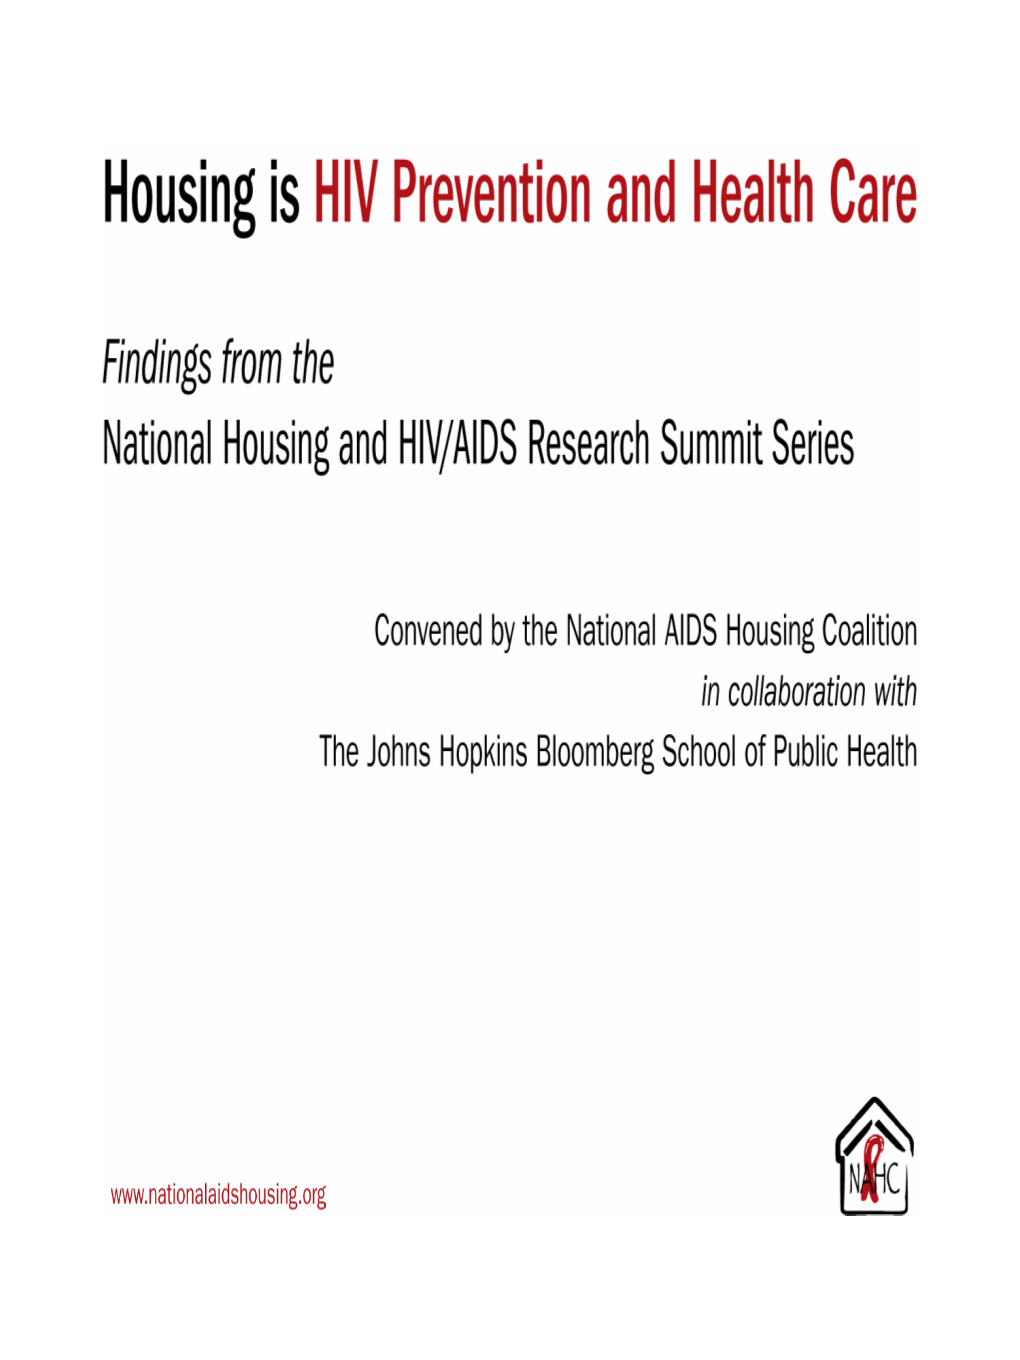 Housing Is HIV Prevention and Health Care